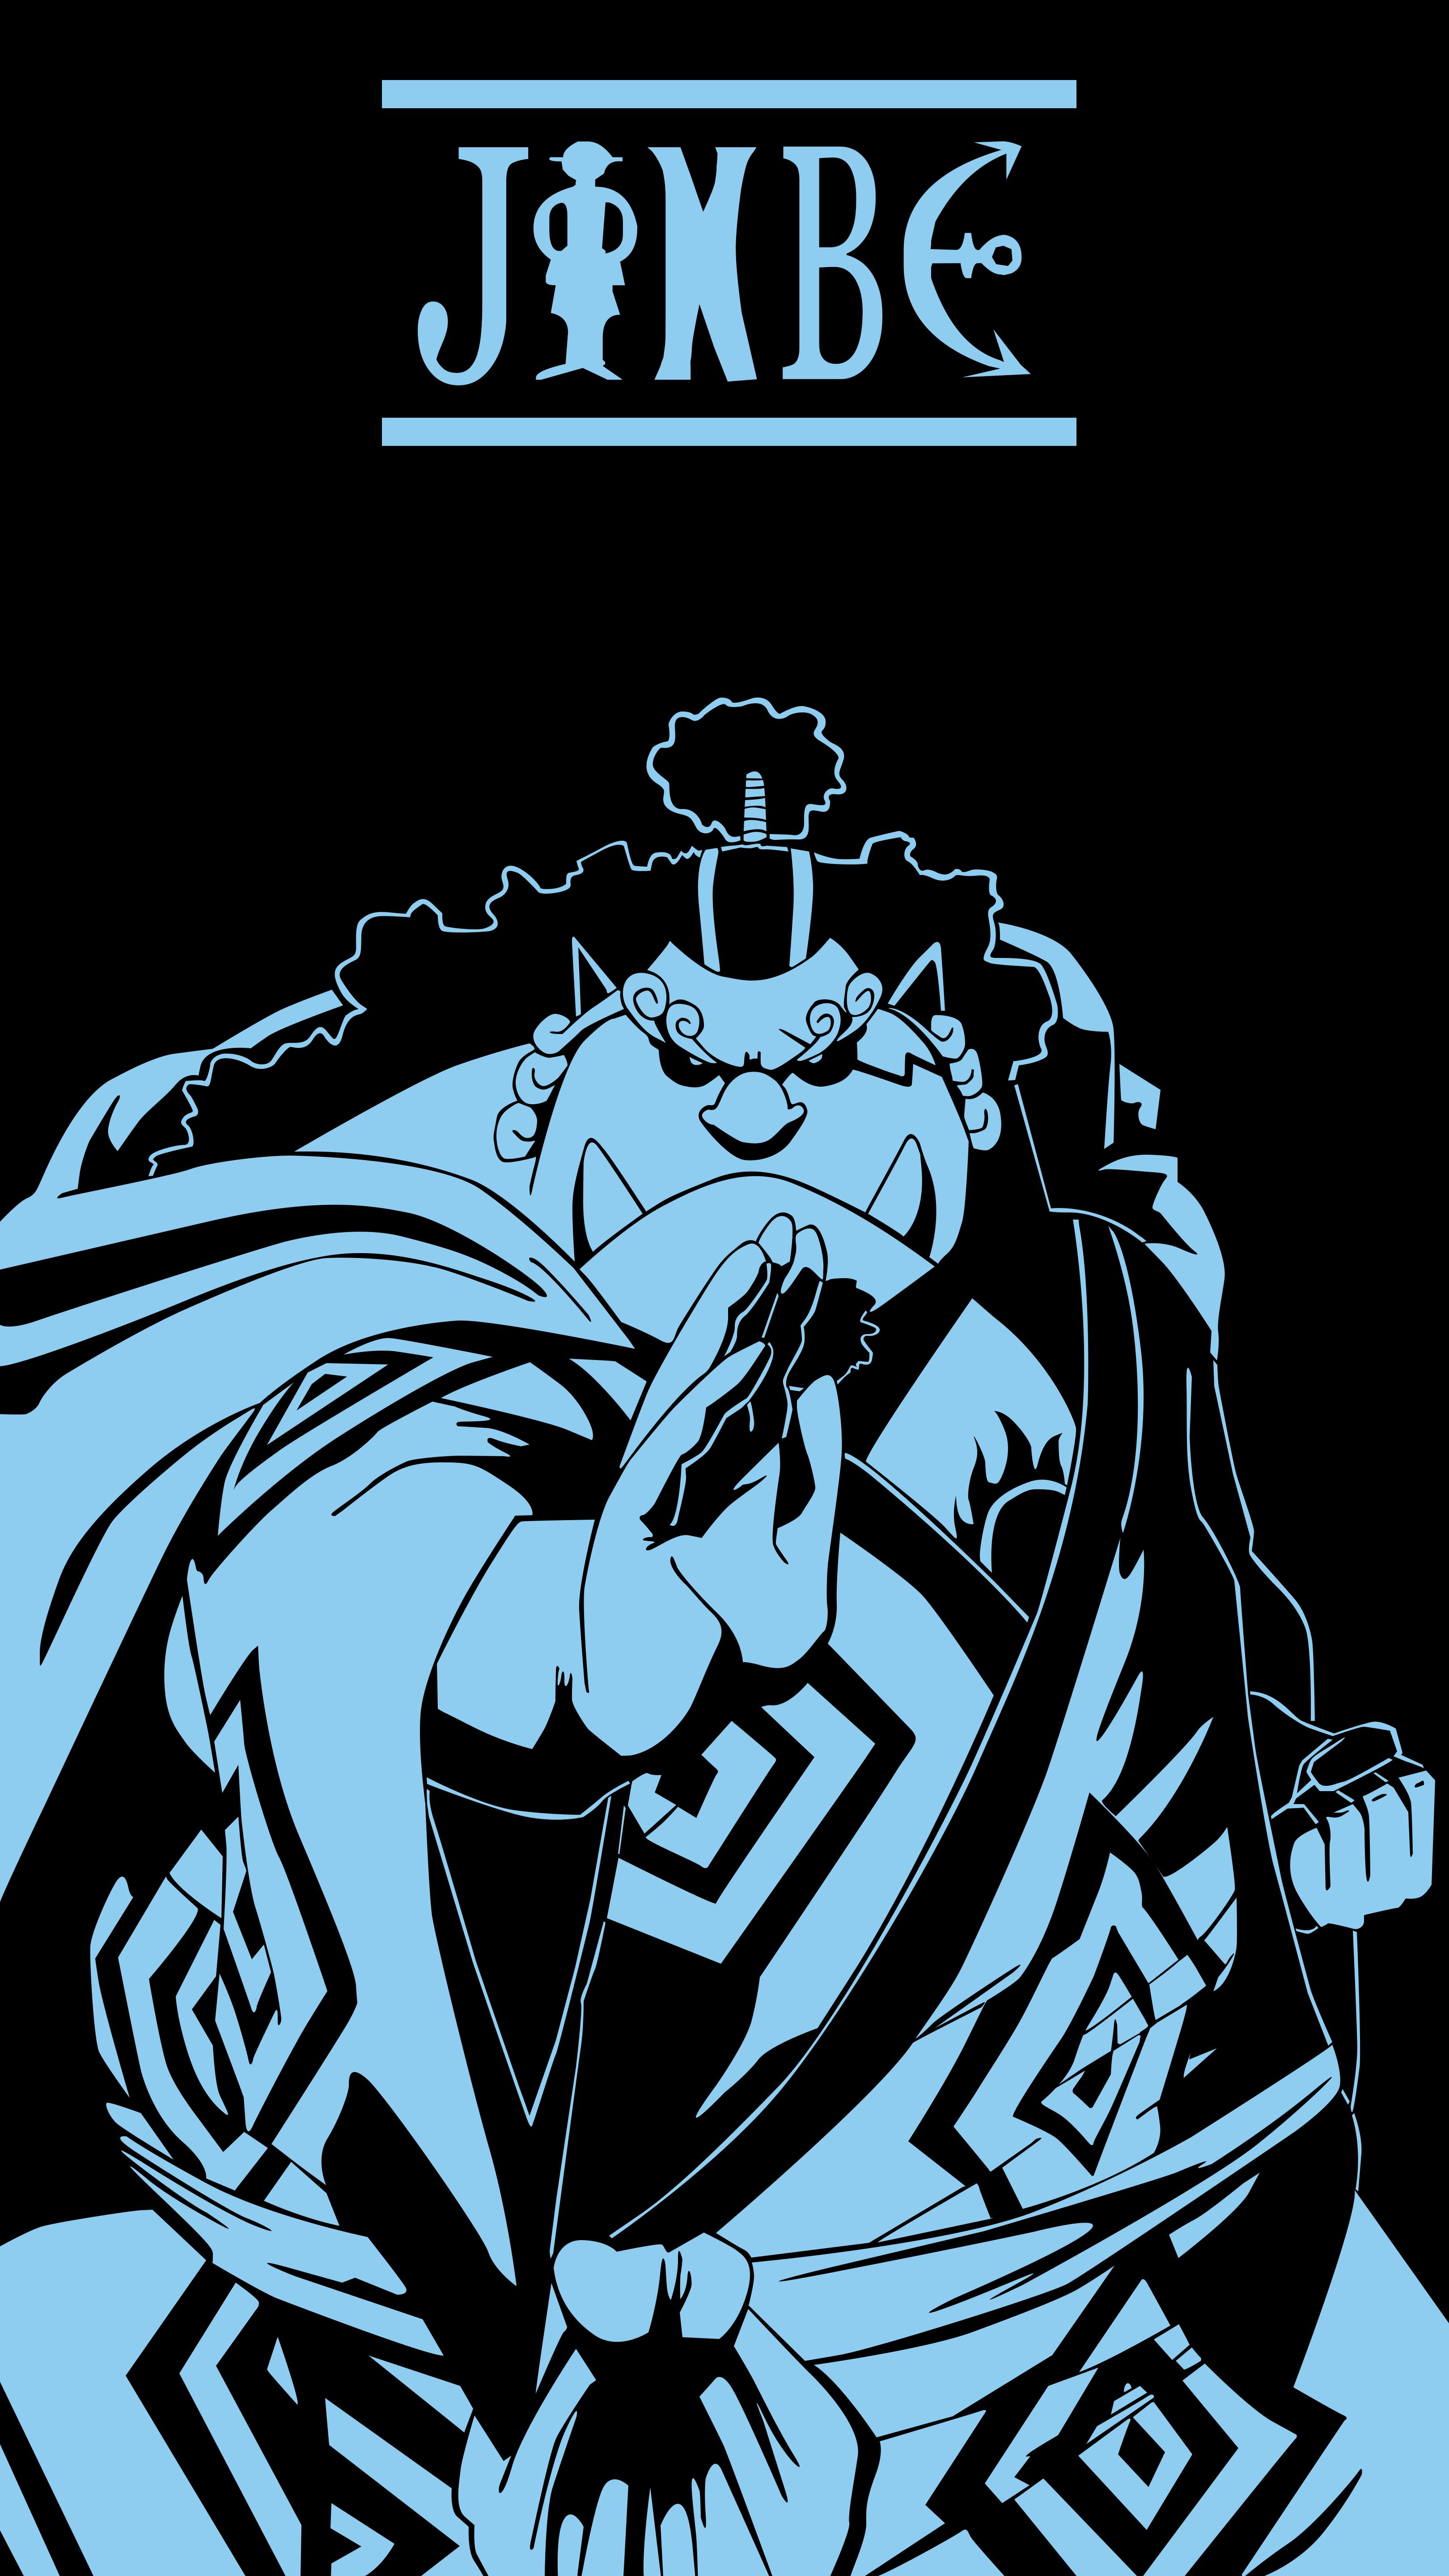 And here we have the last Strawhat (at least for now) Jinbe. Sorry